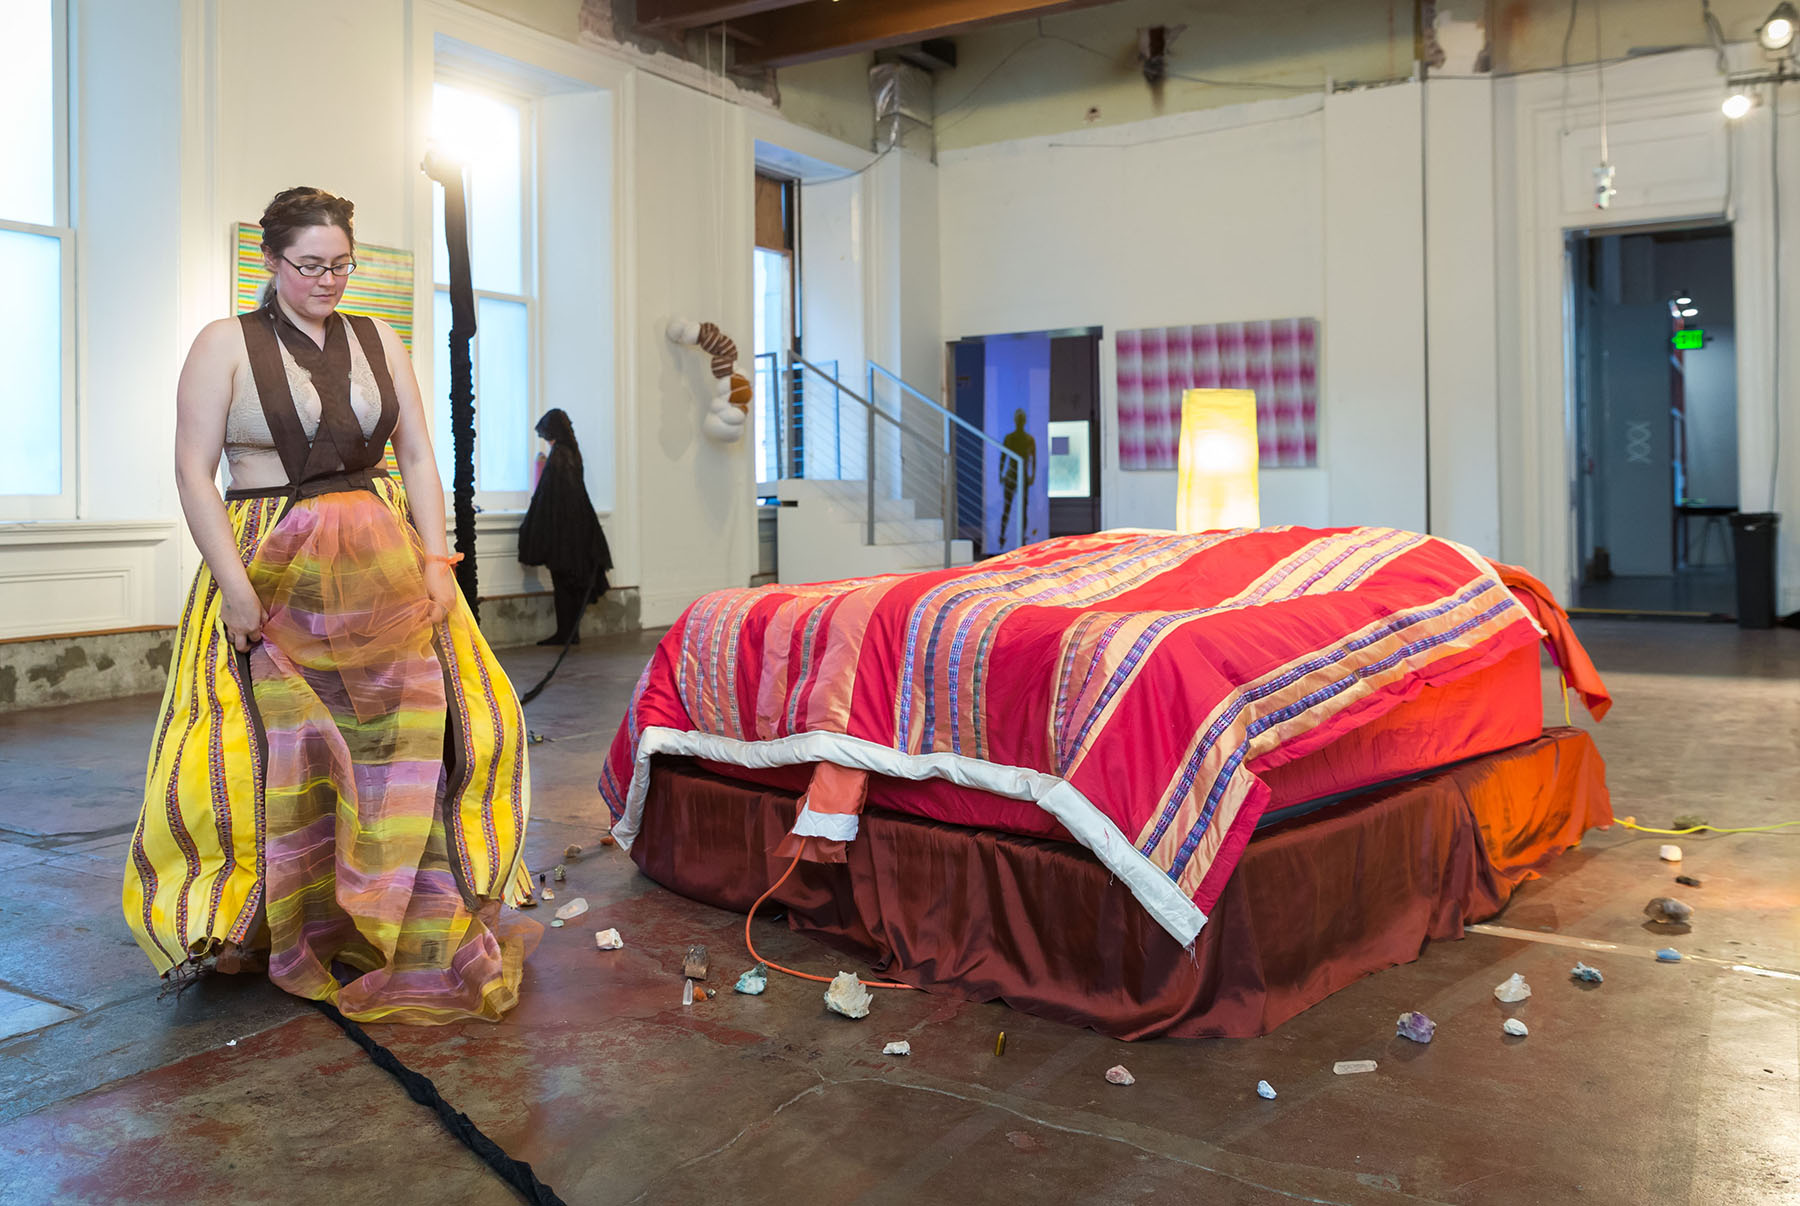 Investigating Morals: Interactive Installation and performance